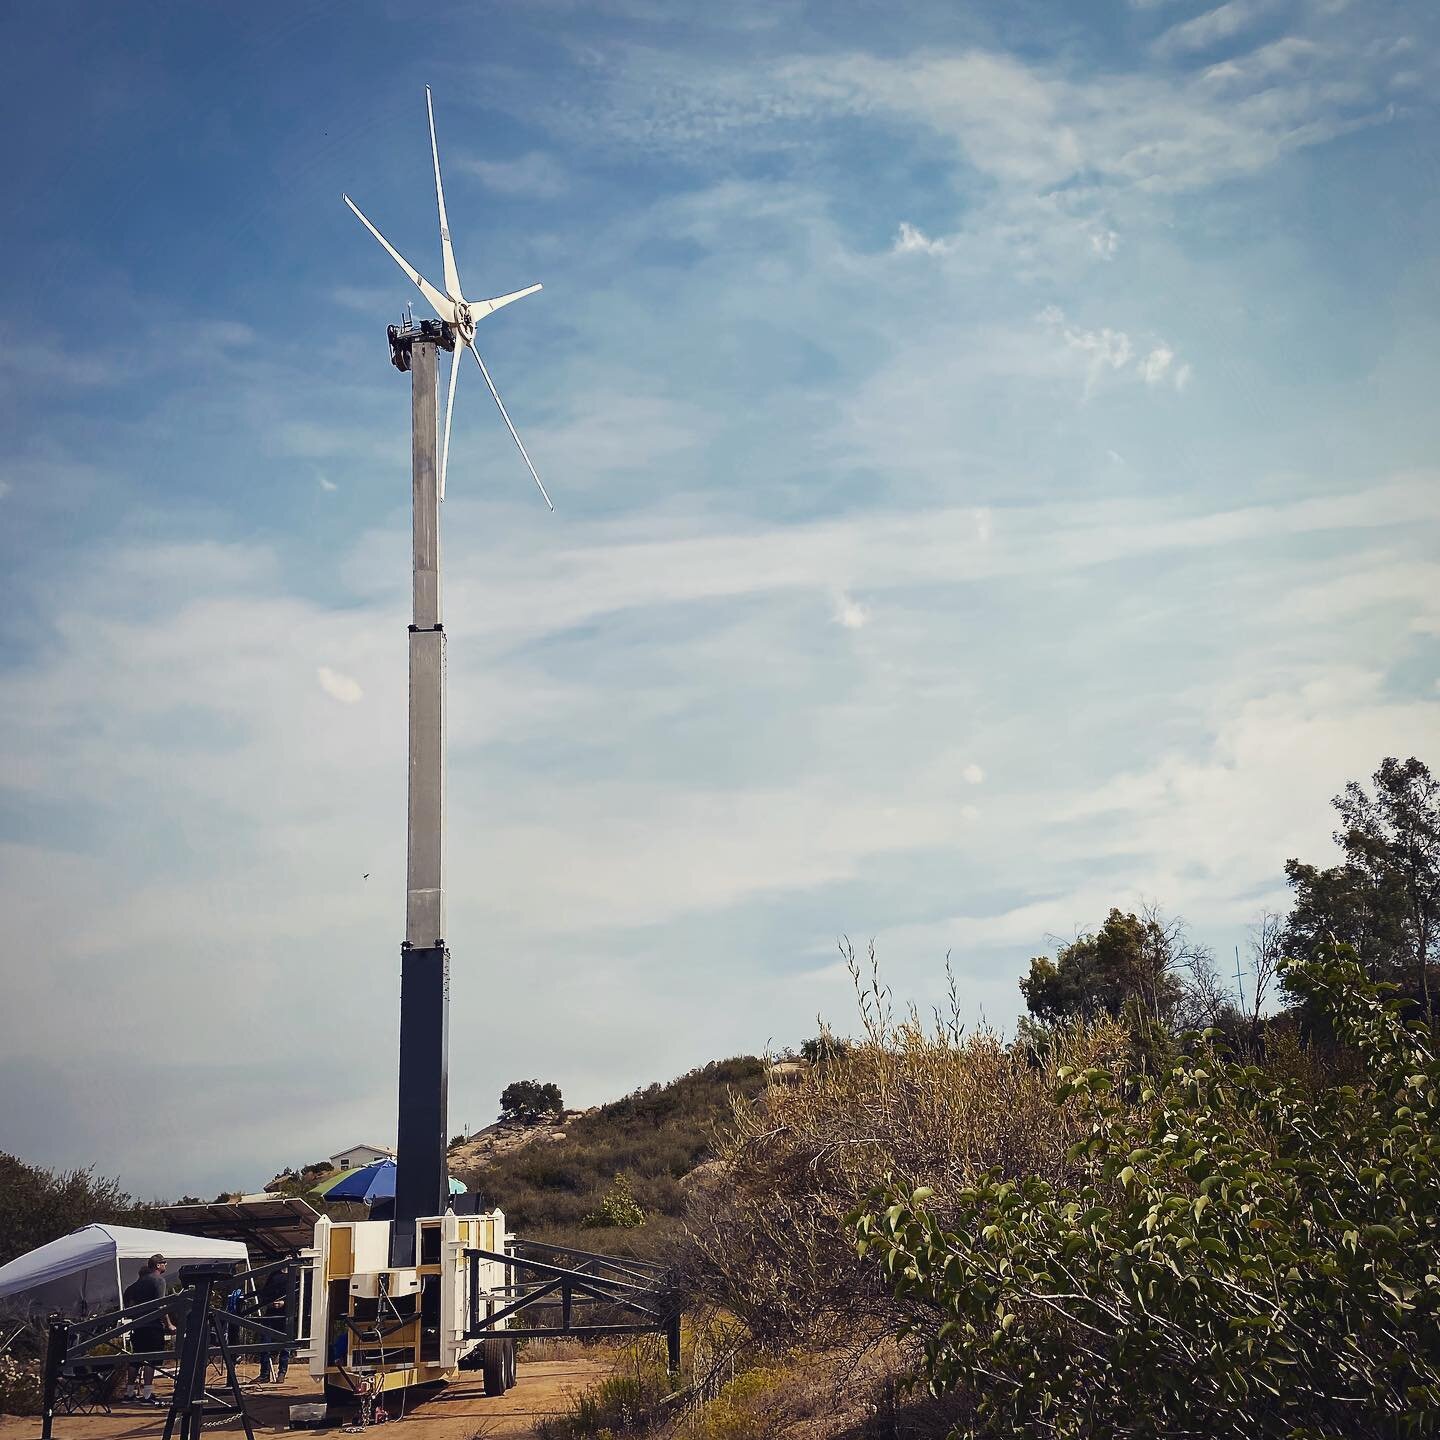 It is difficult to articulate the performance breakthrough we&rsquo;ve achieved with our portable #windturbine. Not only do we make significantly more power than the incumbent technology, we do so in much lower wind speeds, and we&rsquo;re #portable,